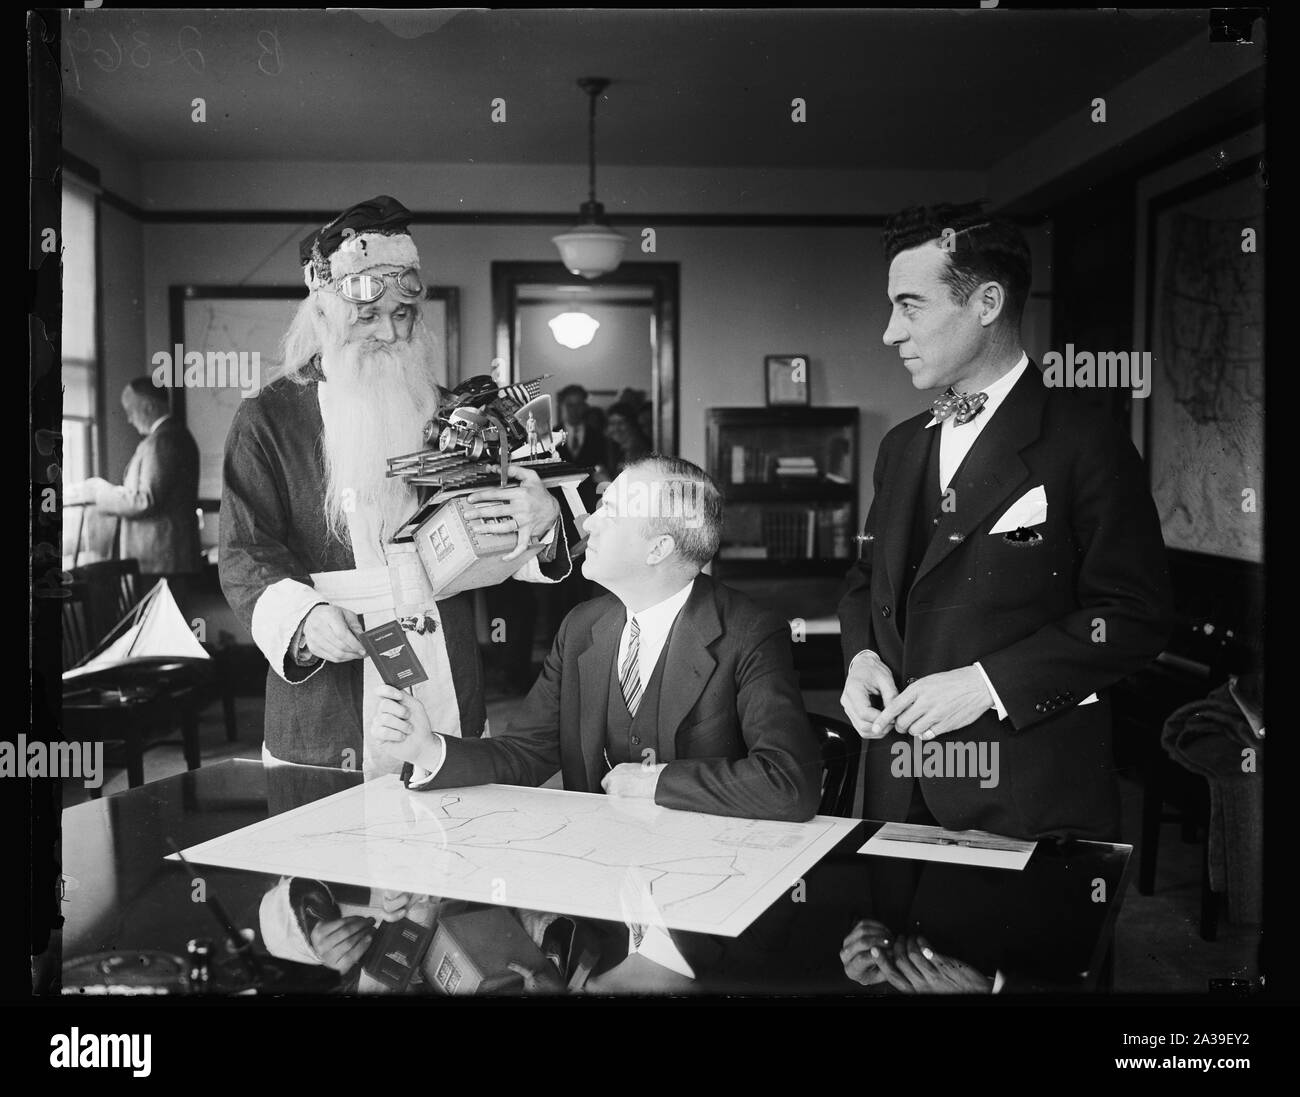 Santa Claus receives aeroplane pilot's license from Assistant Secretary of Commerce. Although there may not be sufficient snow for his reindeer sleigh, Santa Claus will still be able to deliver his load of presents on time this Christmas by using the air route. The old saint called at the Commerce Department in Washington today where he is shown receiving an aeroplane pilot's license from Assistant Secretary of Commerce. for Aeronautics William P. MacCracken, while Clarence M. Young (right) Director of Aeronautics, Department of Commerce, looks on. Airway maps and the assurance that the lights Stock Photo